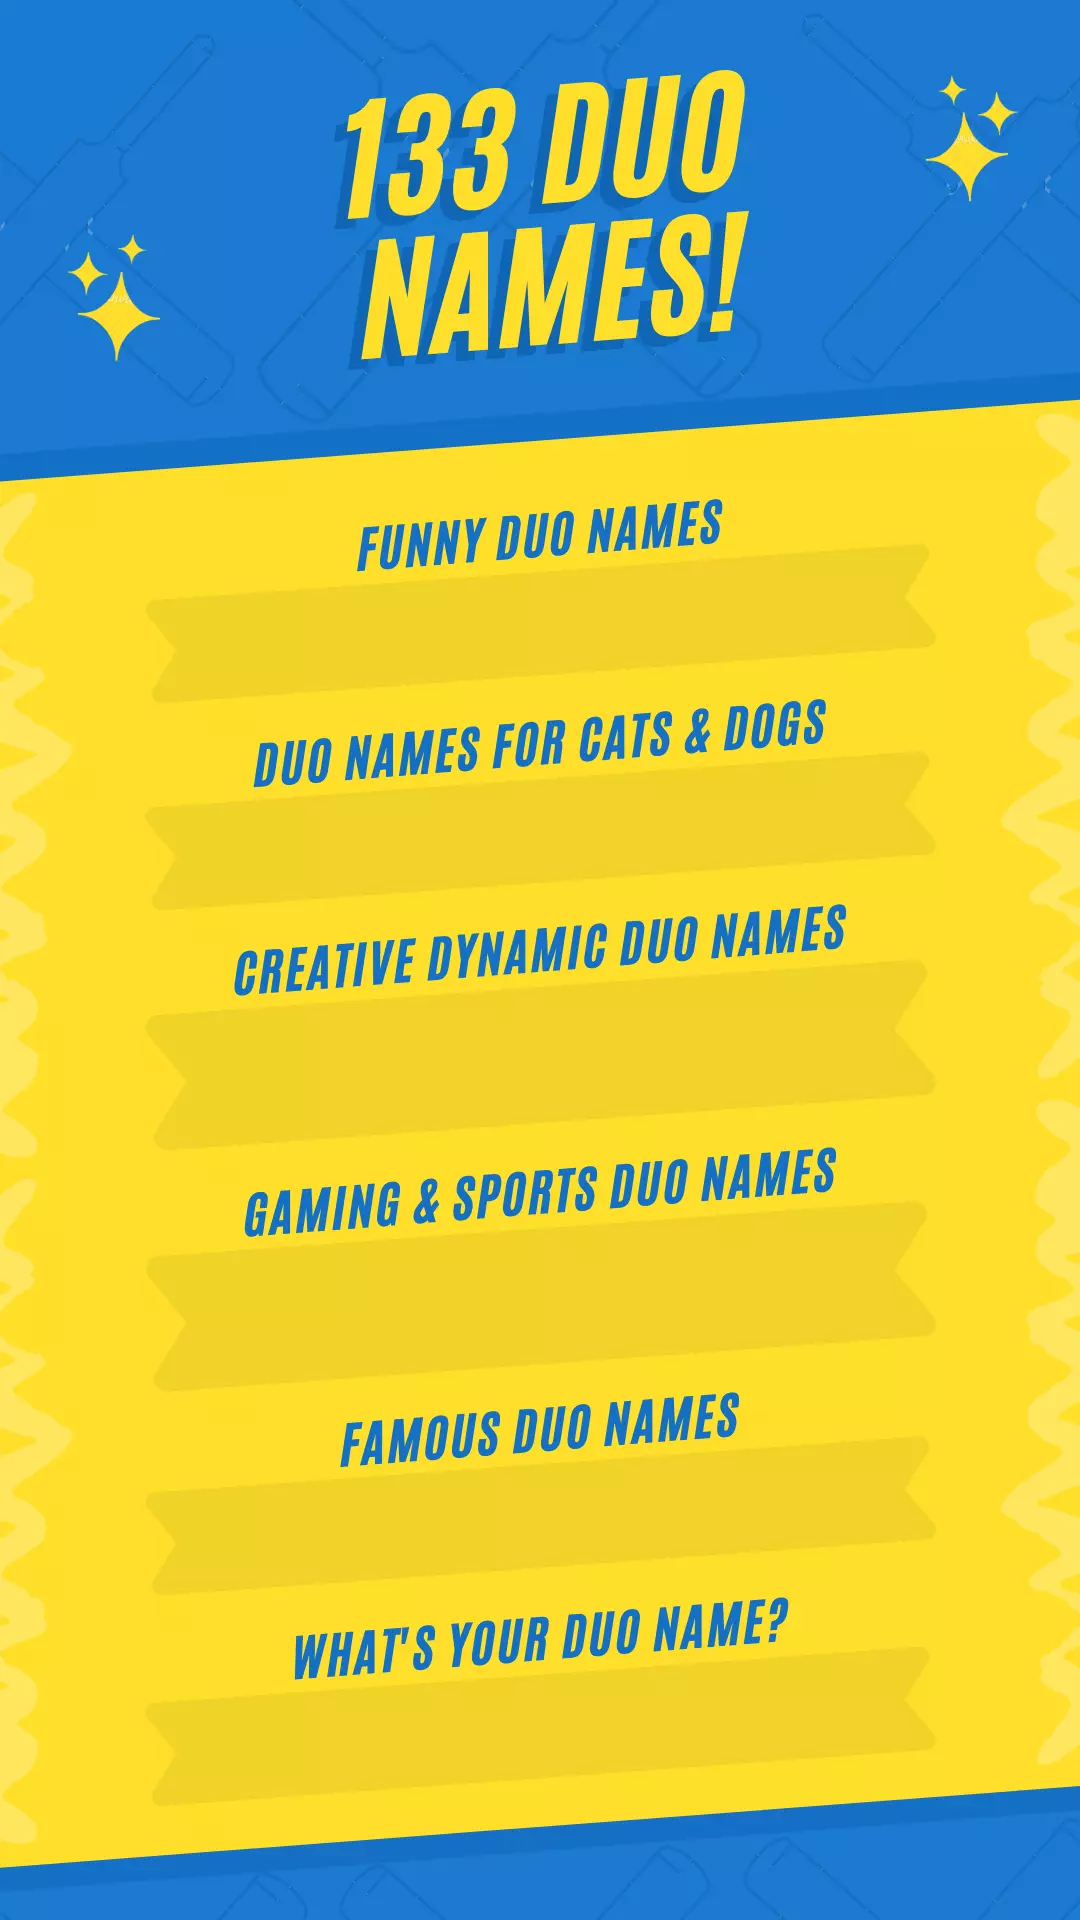 133 Duo Names, Funny, creative, wonderful, unique duo names for sports, games, work, company